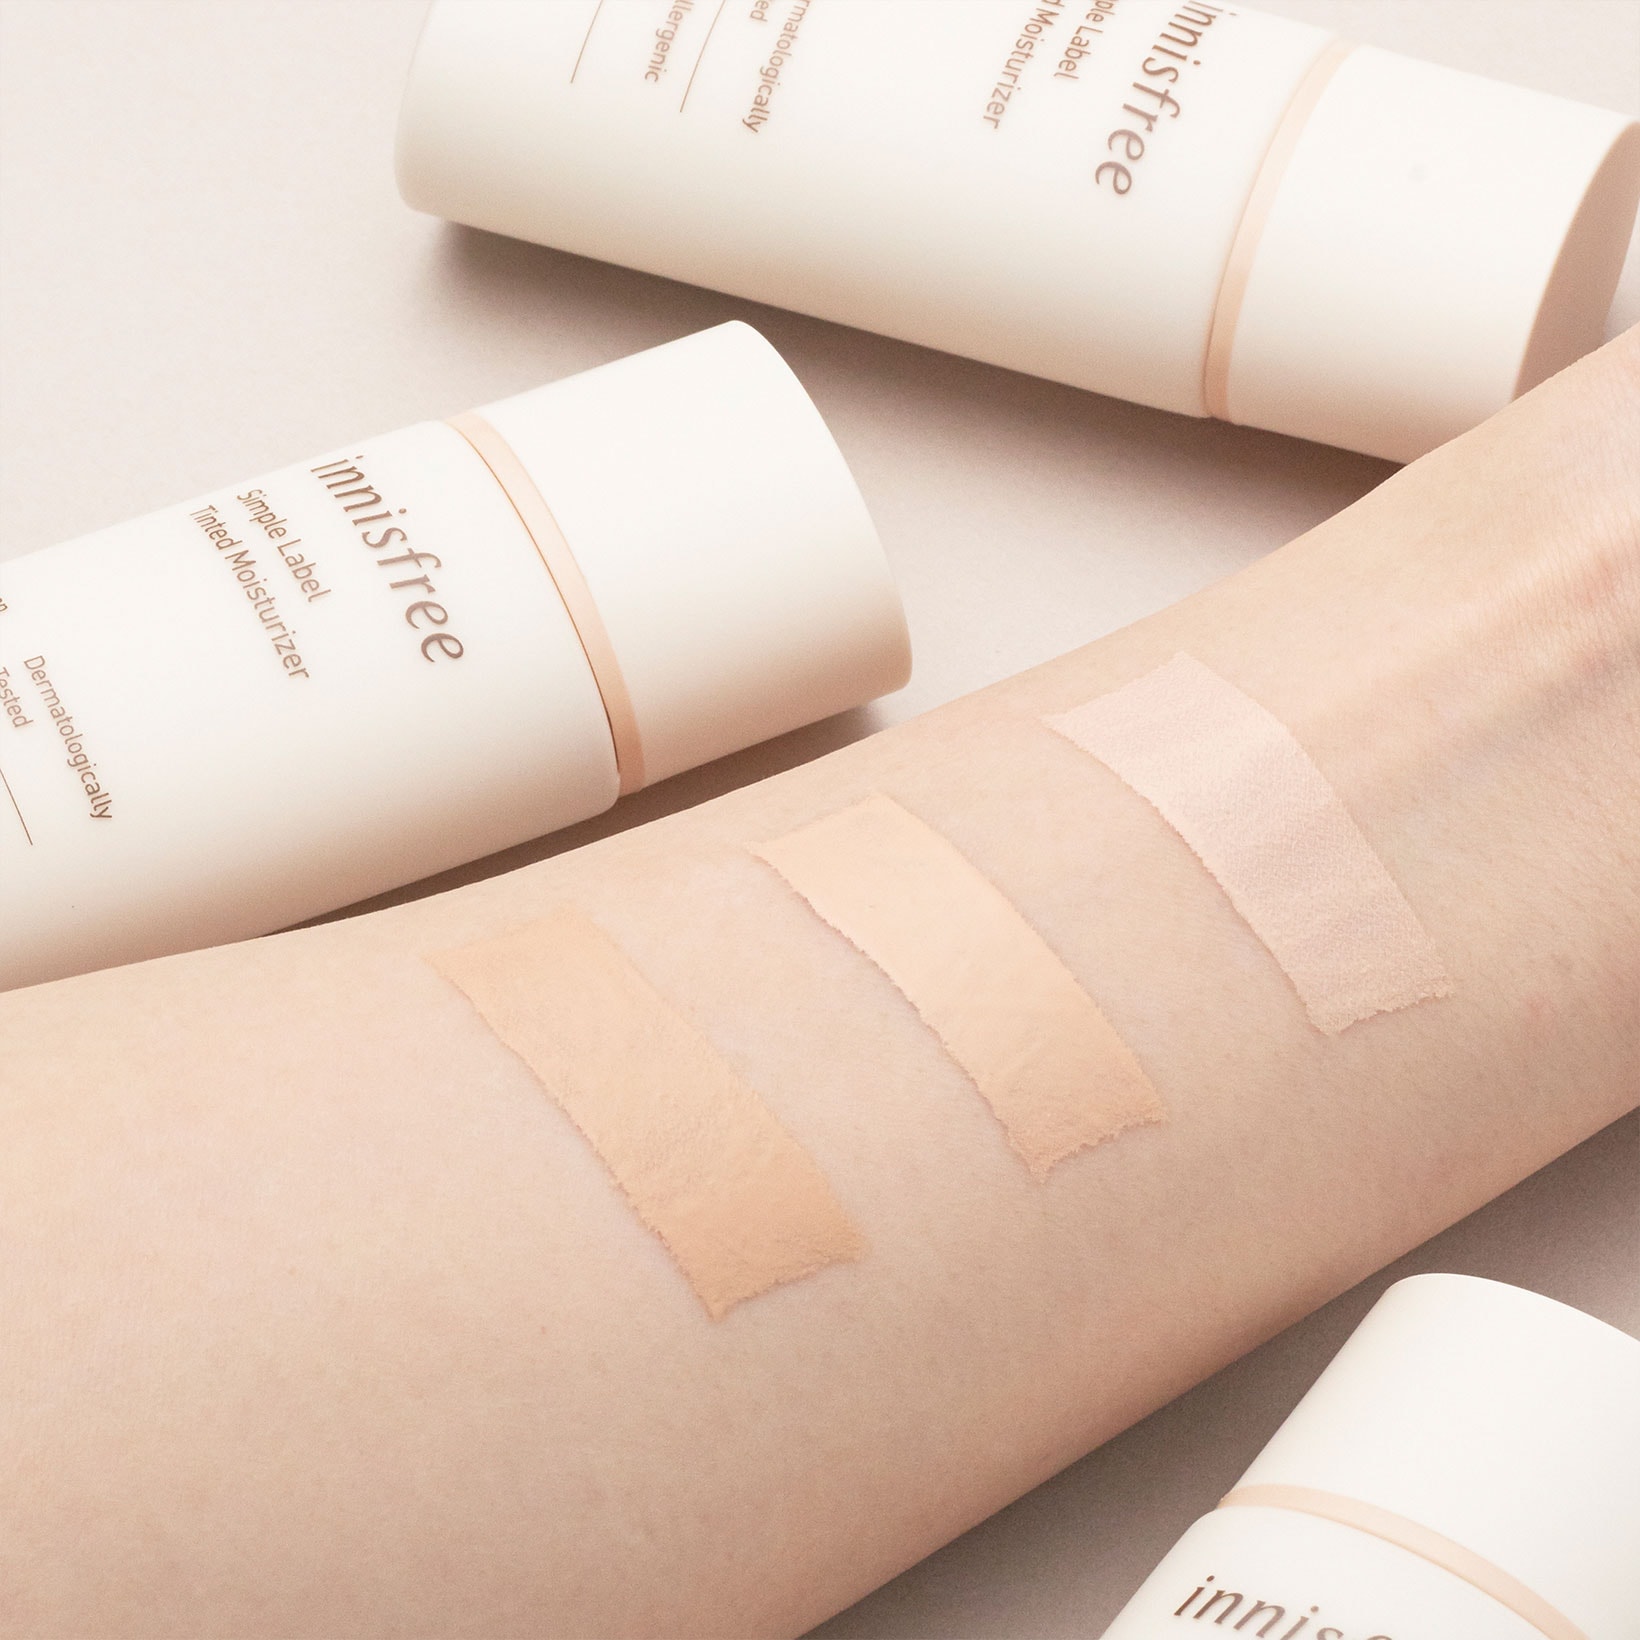 innisfree vegan makeup collection k-beauty simple label tinted moisturizer color swatch